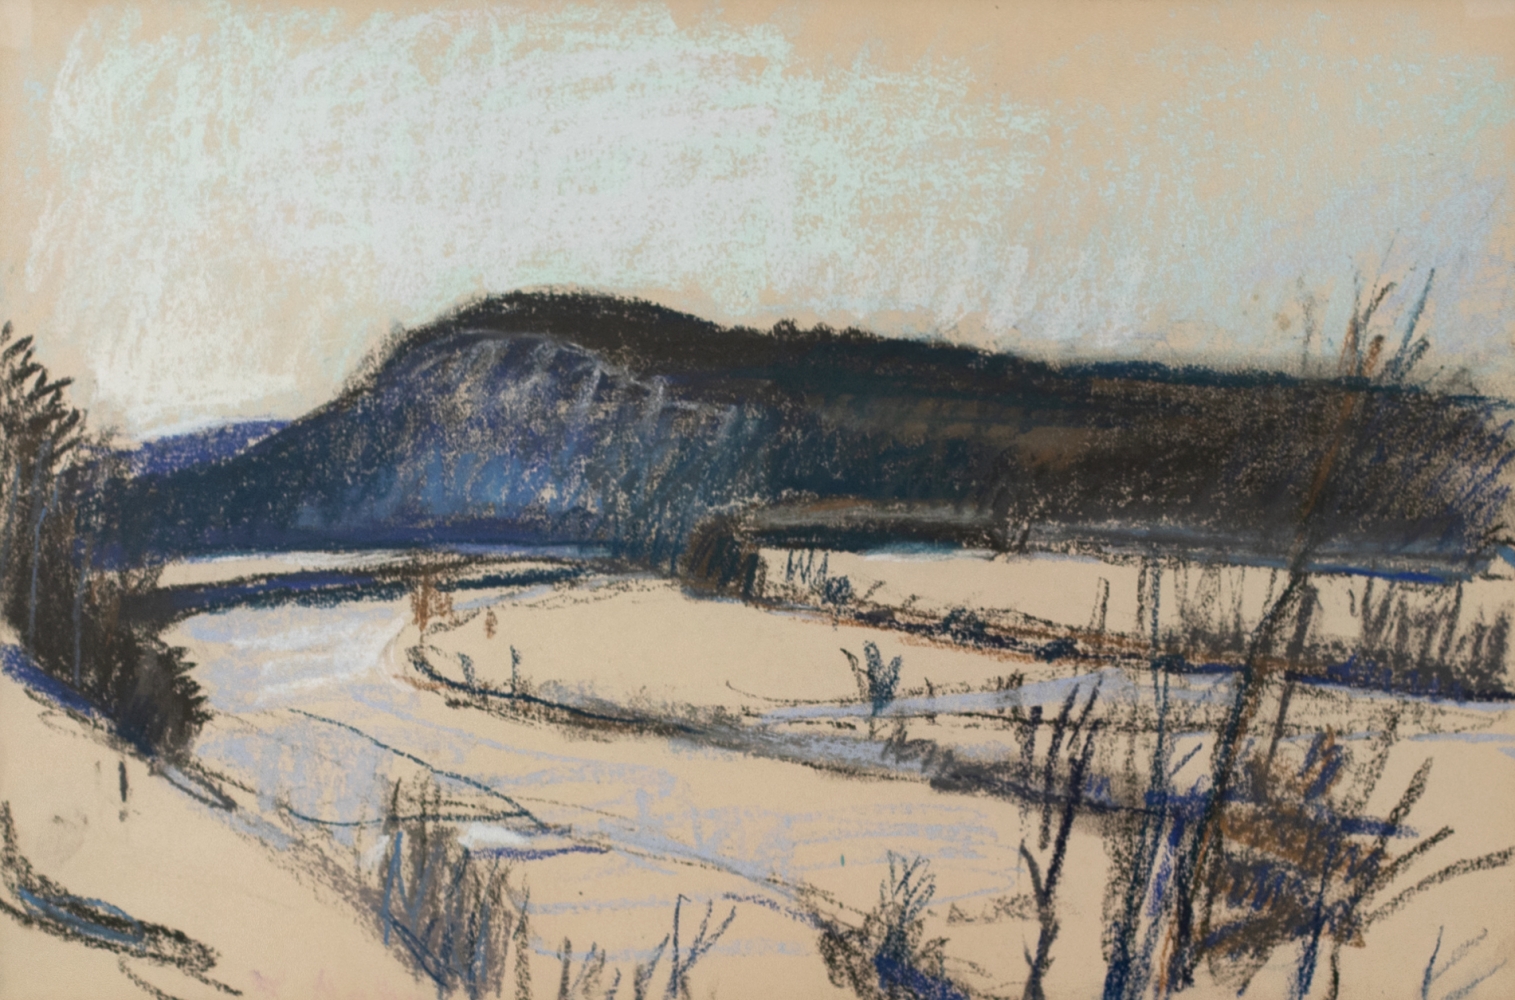 Wolf Kahn, A Study for Winter, 1984, Pastel, 12x18 inches, Wolf Kahn pastel, Wolf Kahn pastel for sale